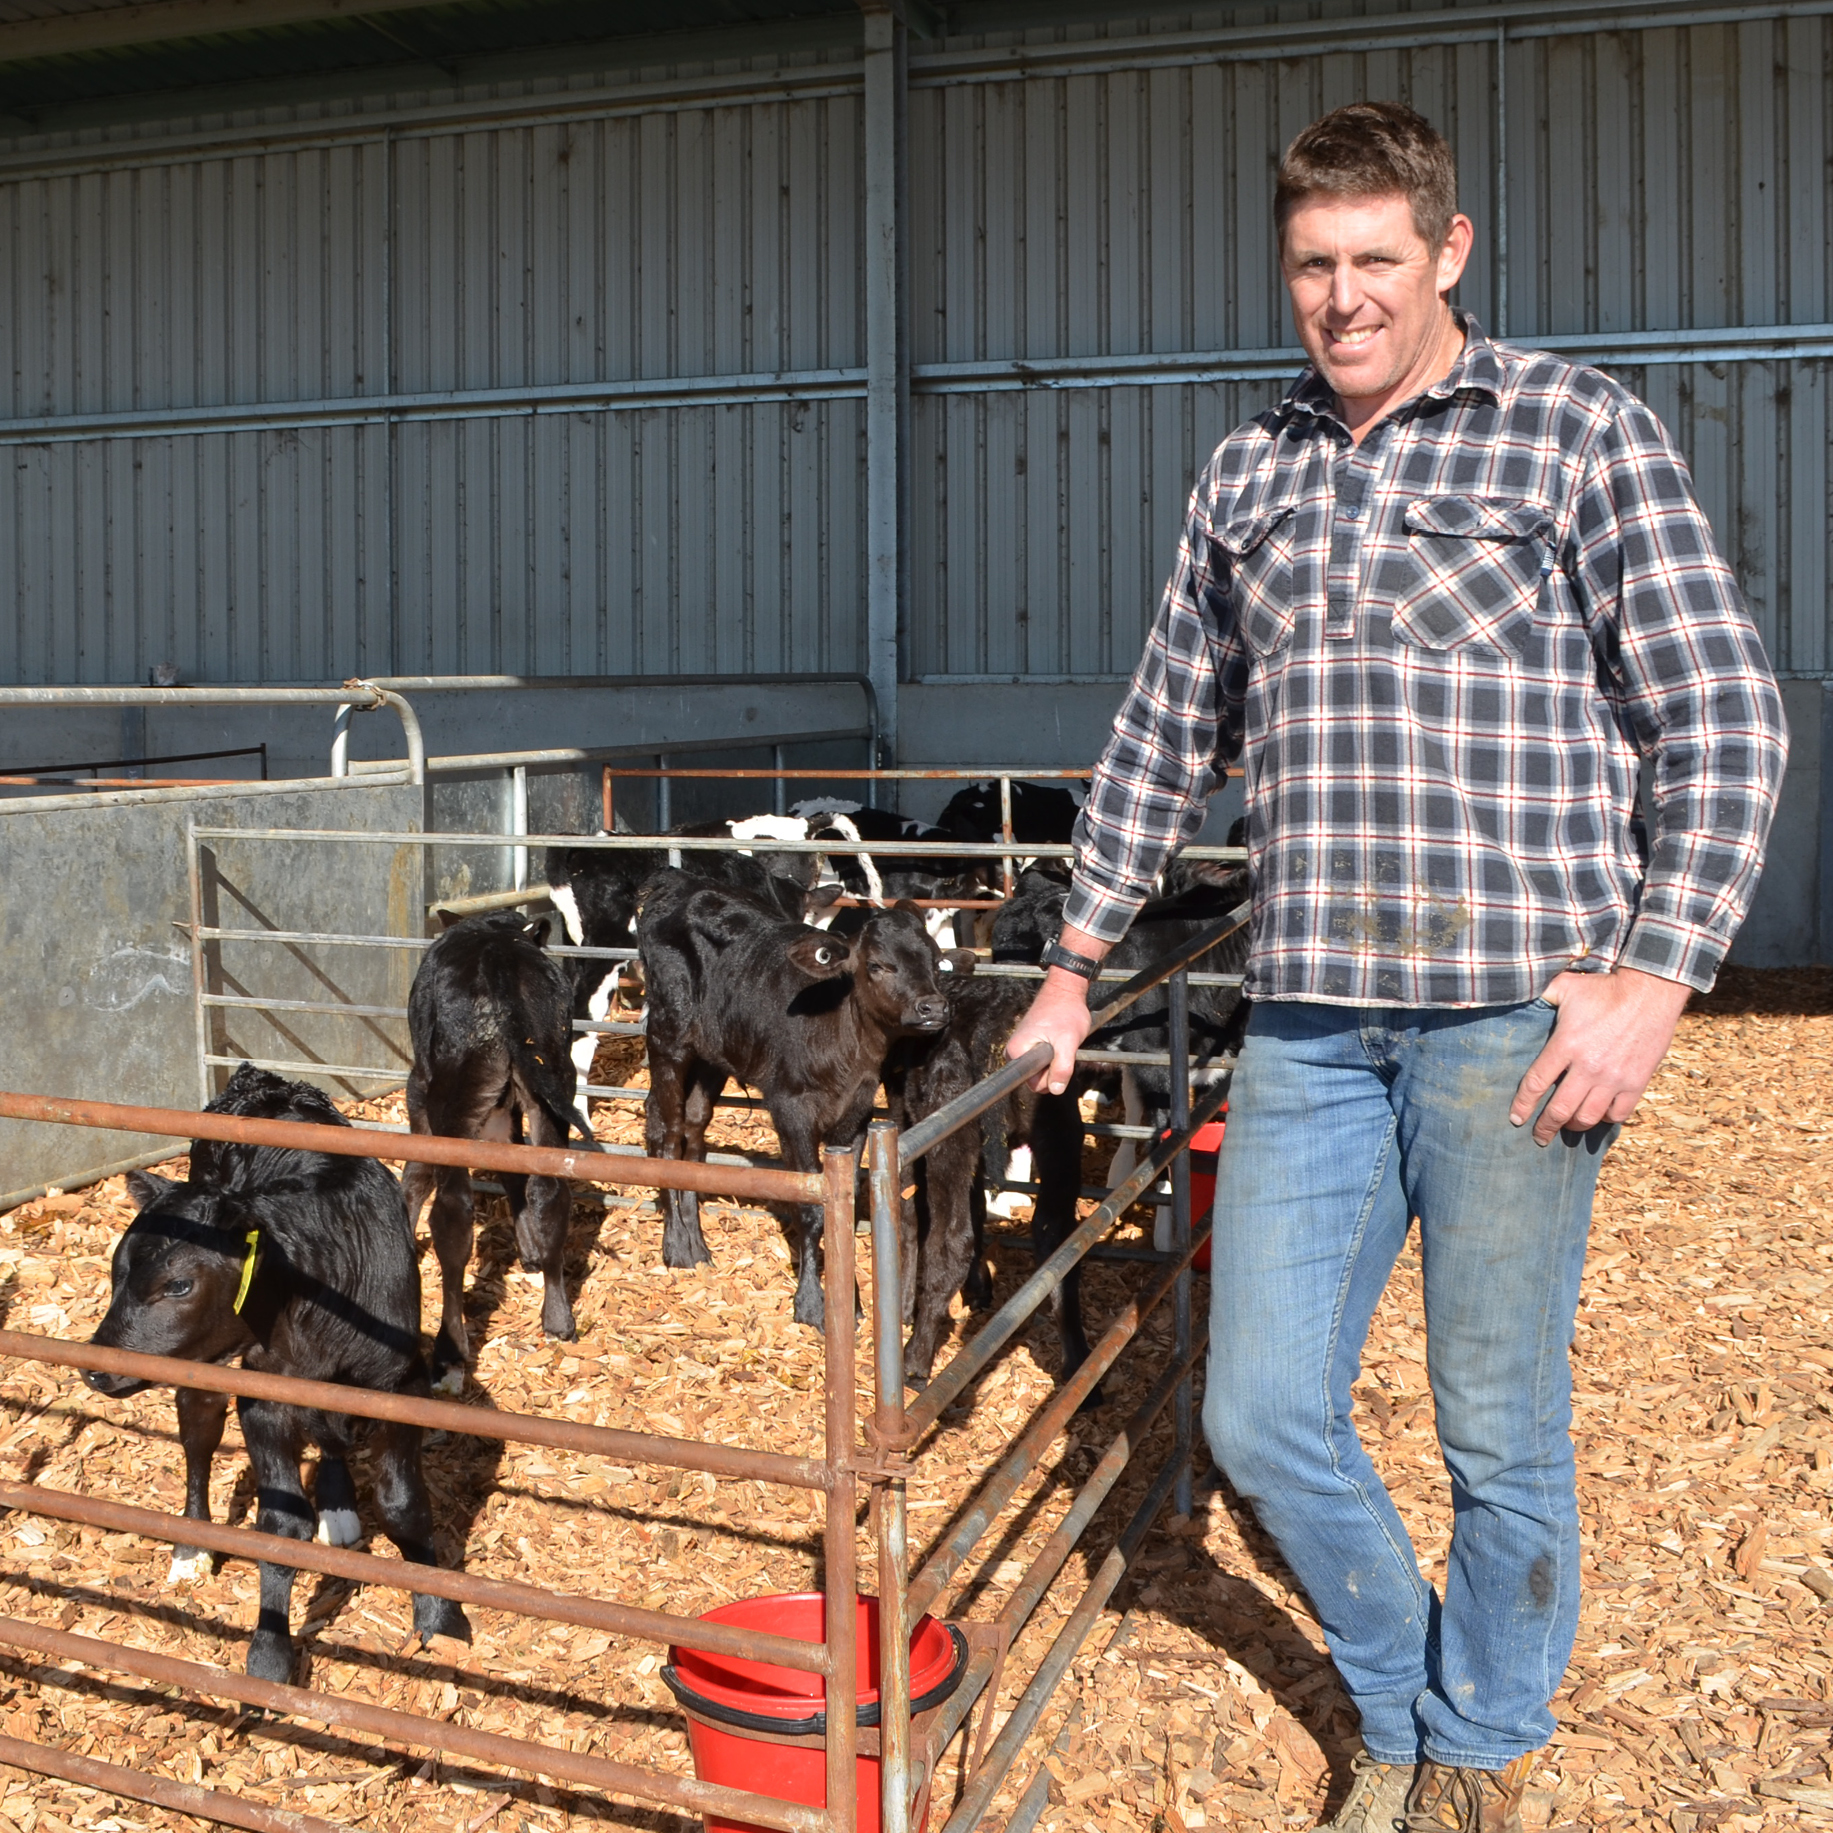 A farmer stands next to a pen with five calves.